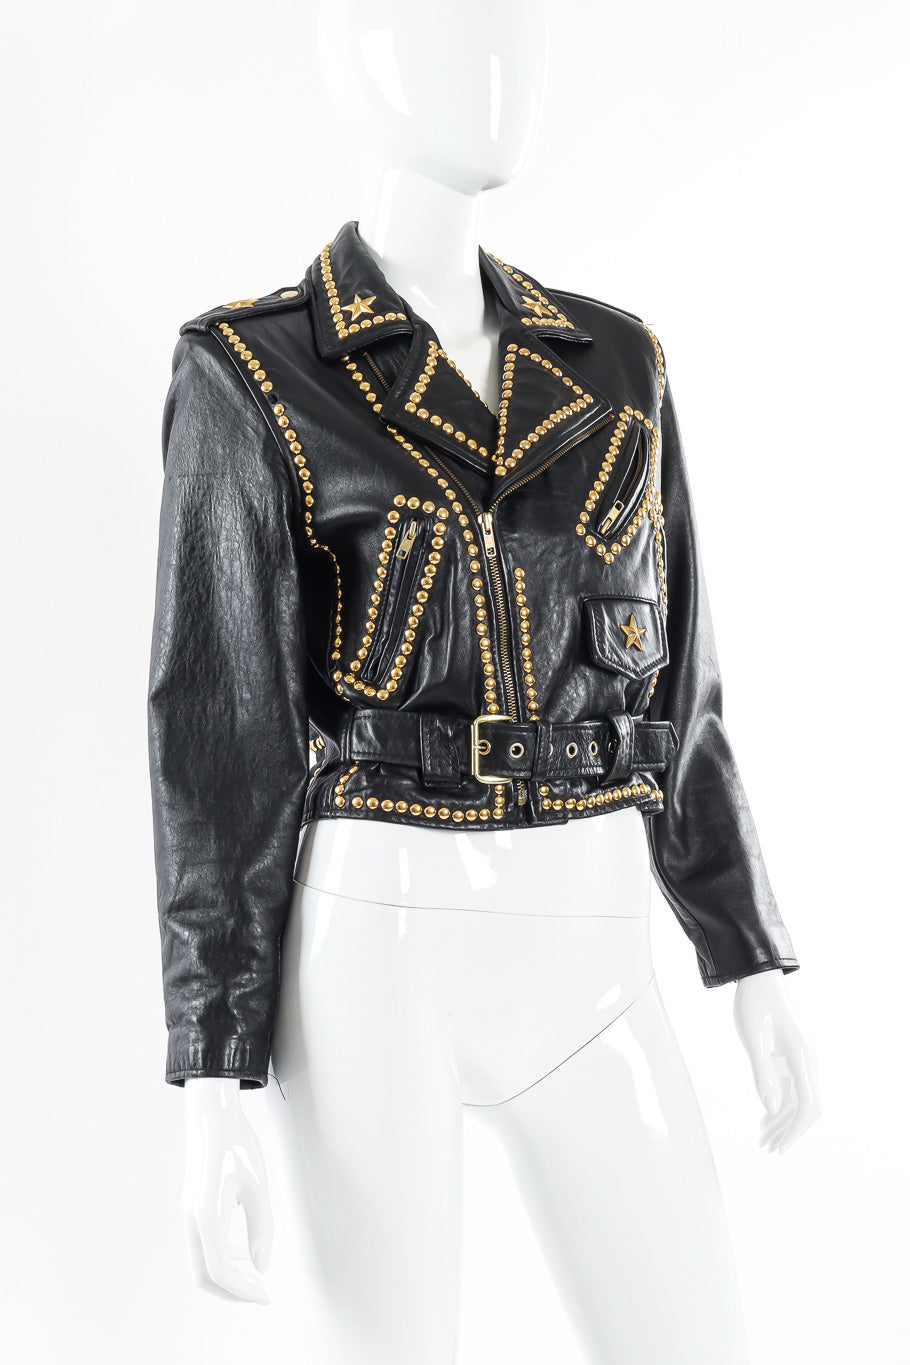 Motorcycle zip jacket by Caché mannequin full 3/4 @recessla